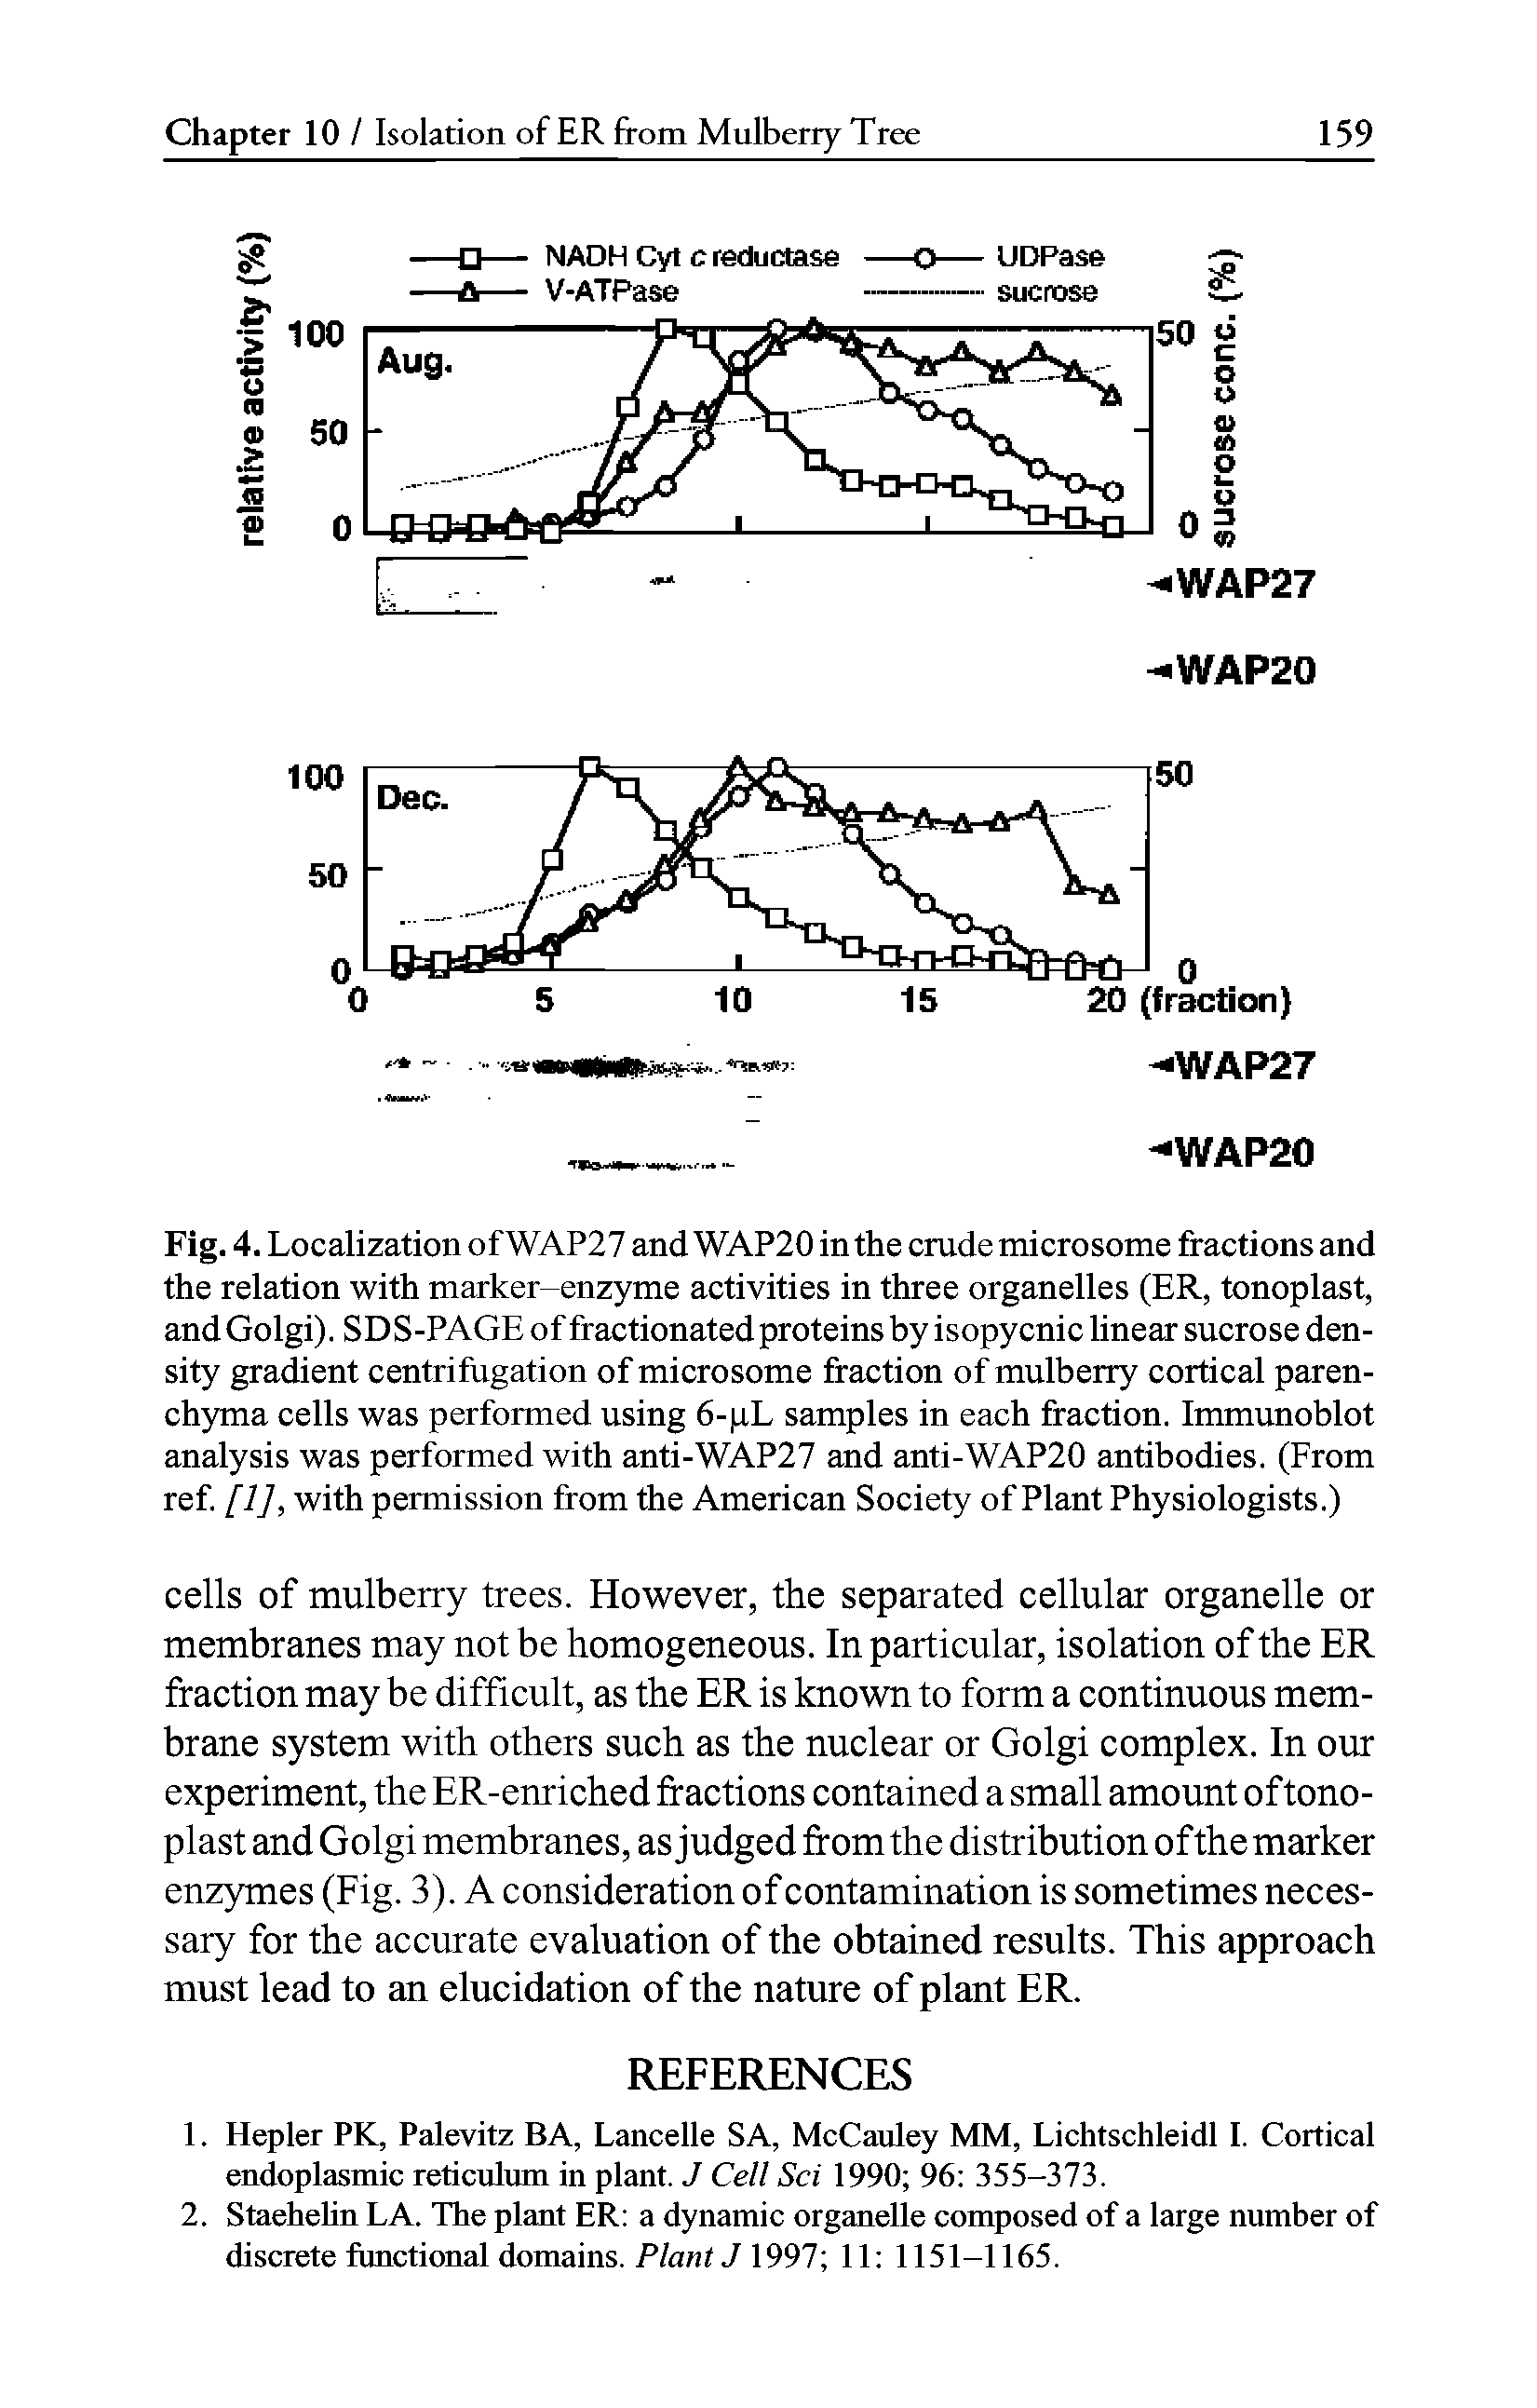 Fig. 4. Localization of WAP27 and WAP20 in the crude microsome fractions and the relation with marker-enzyme activities in three organelles (ER, tonoplast, and Golgi). SDS-PAGE of fractionated proteins by isopycnic linear sucrose density gradient centrifugation of microsome fraction of mulberry cortical parenchyma cells was performed using 6-pL samples in each fraction. Immunoblot analysis was performed with anti-WAP27 and anti-WAP20 antibodies. (From ref. [1], with permission from the American Society of Plant Physiologists.)...